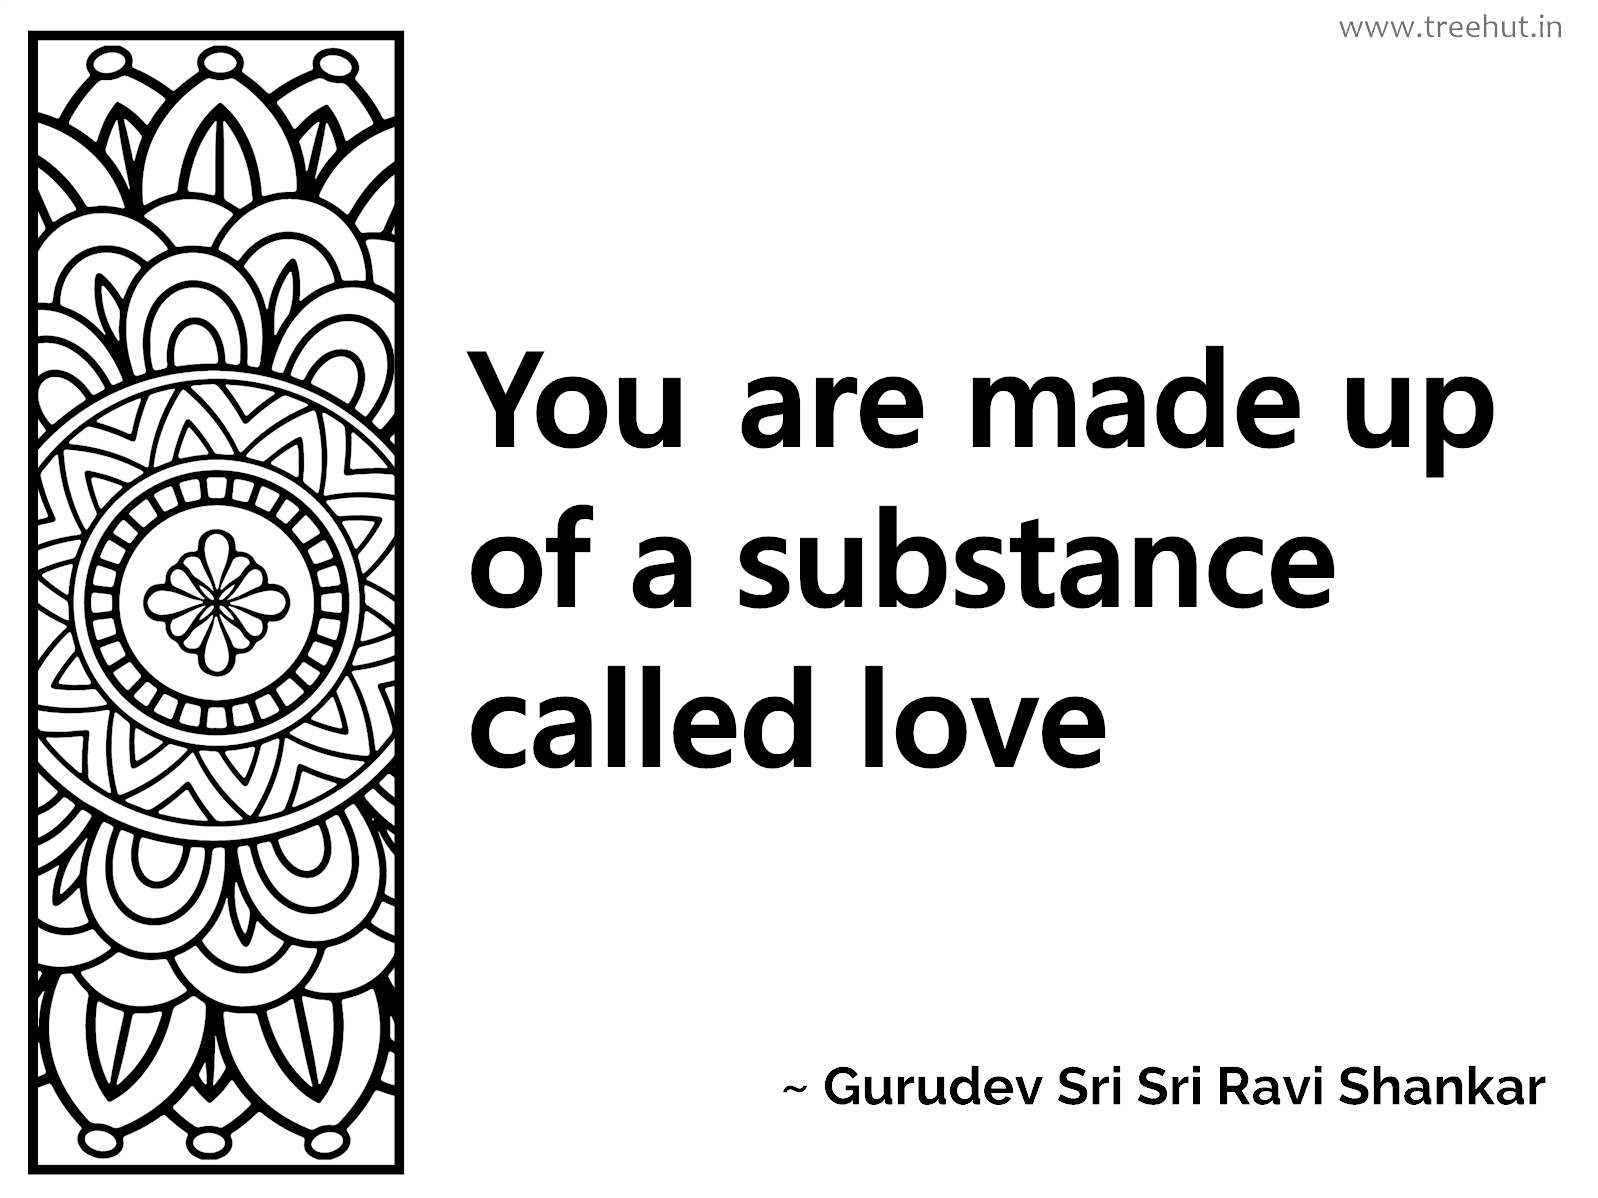 You are made up of a substance called love Inspirational Quote by Gurudev Sri Sri Ravi Shankar, coloring pages